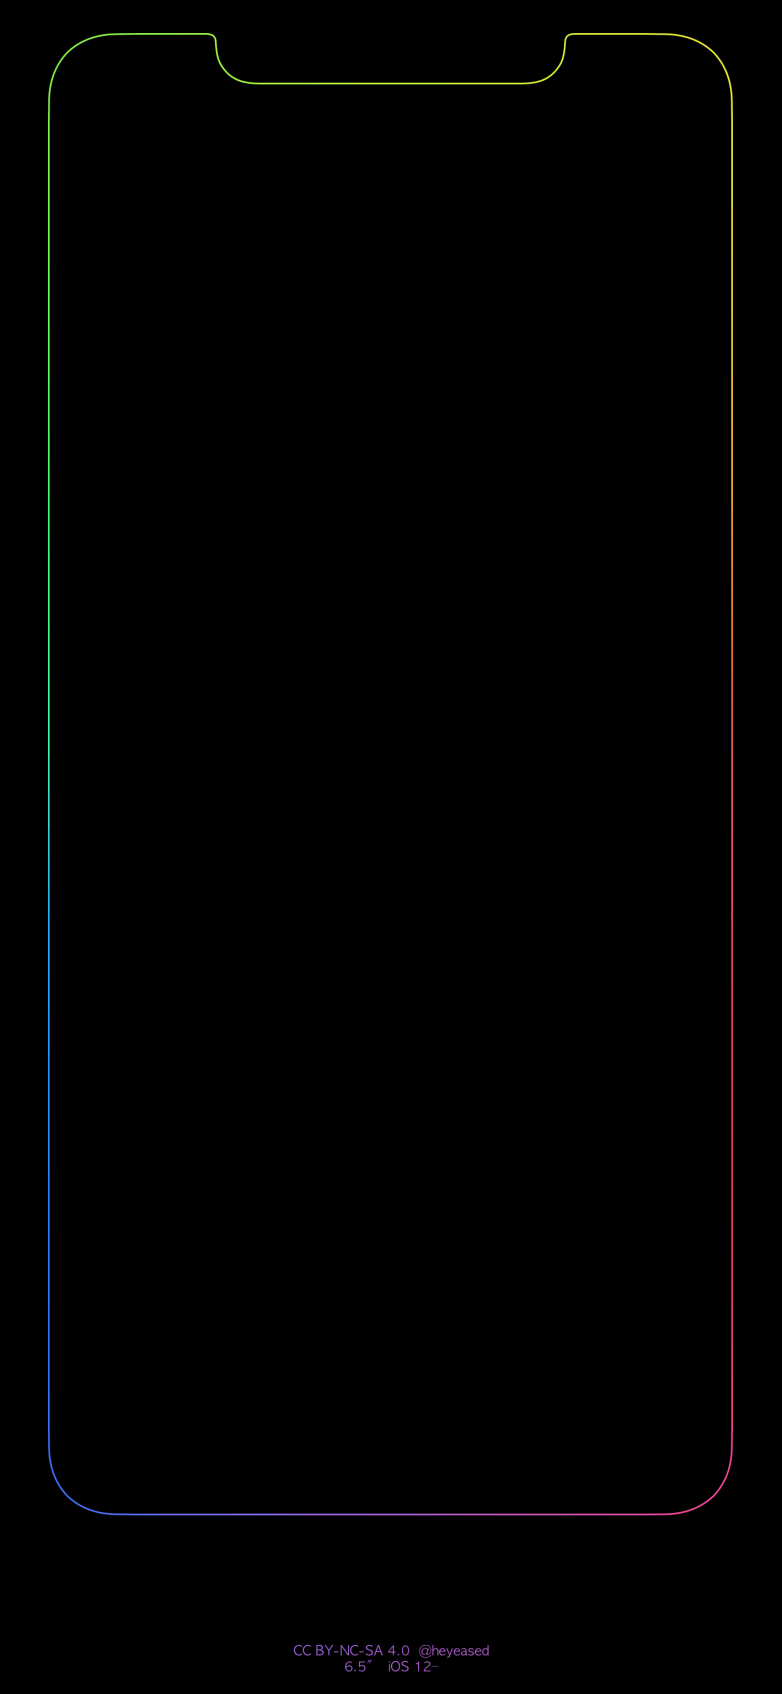 The ultimate iPhone X wallpaper has finally been updated for